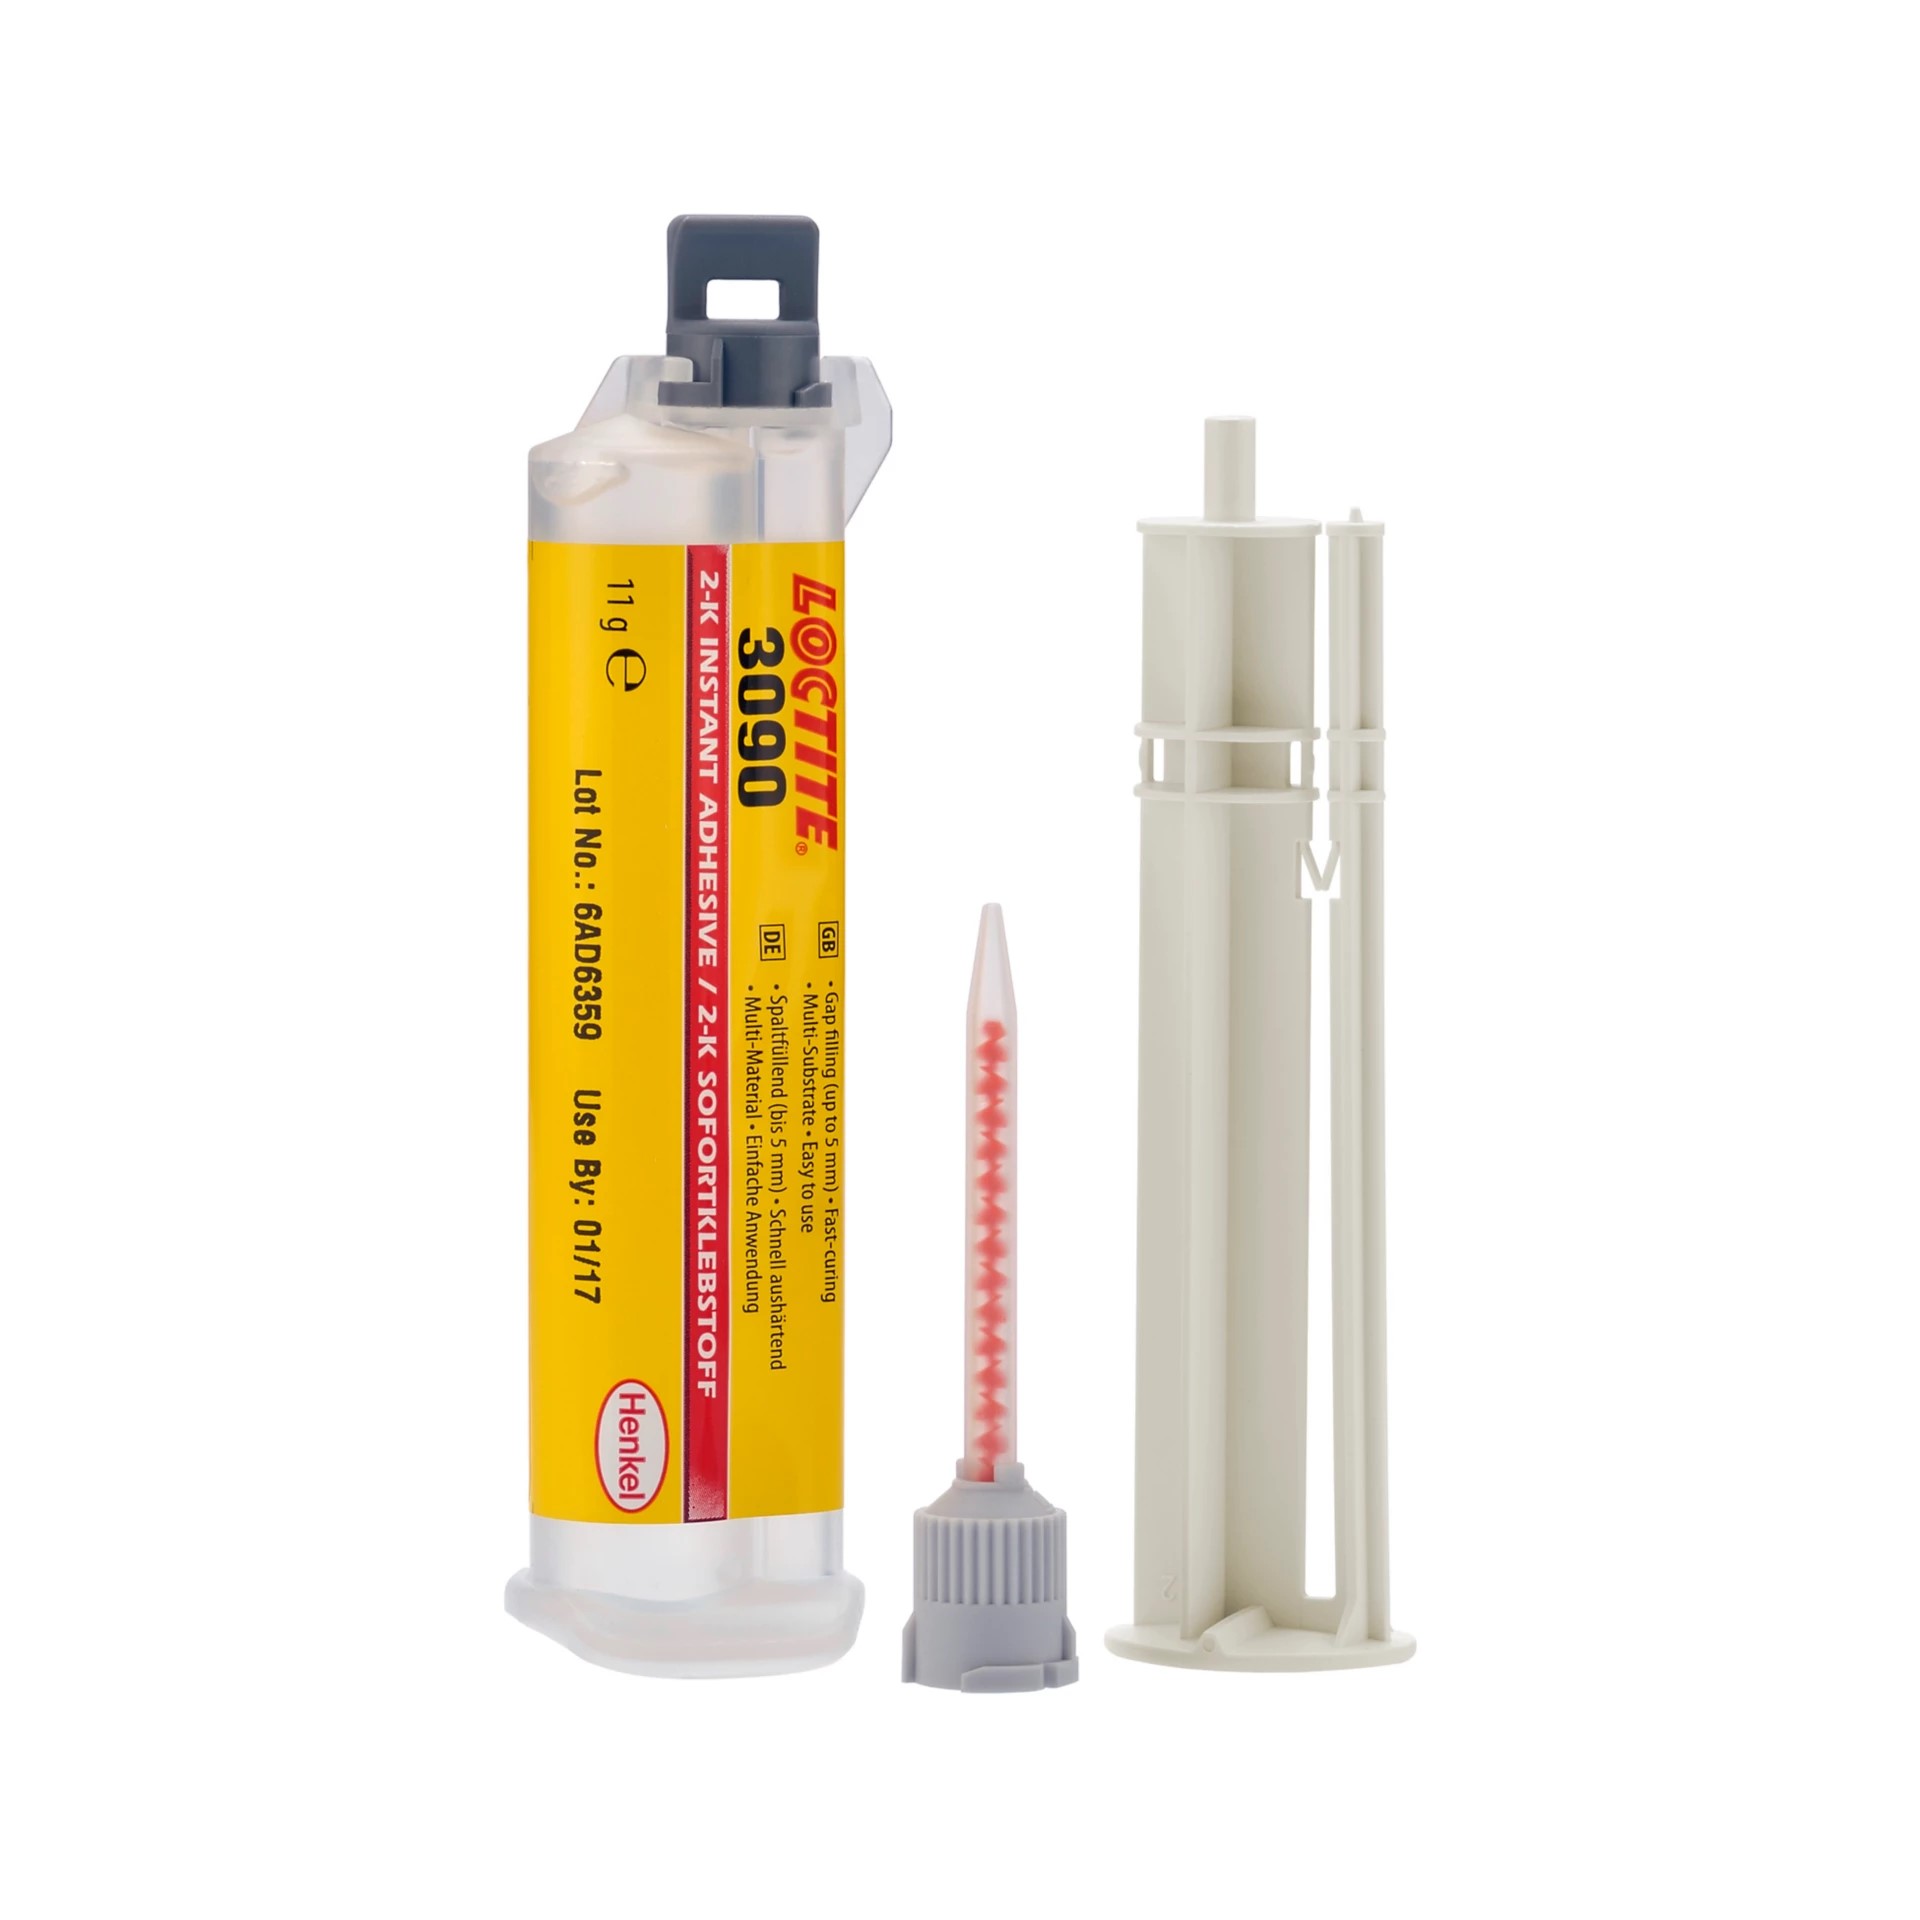 LOCTITE two-component adhesive